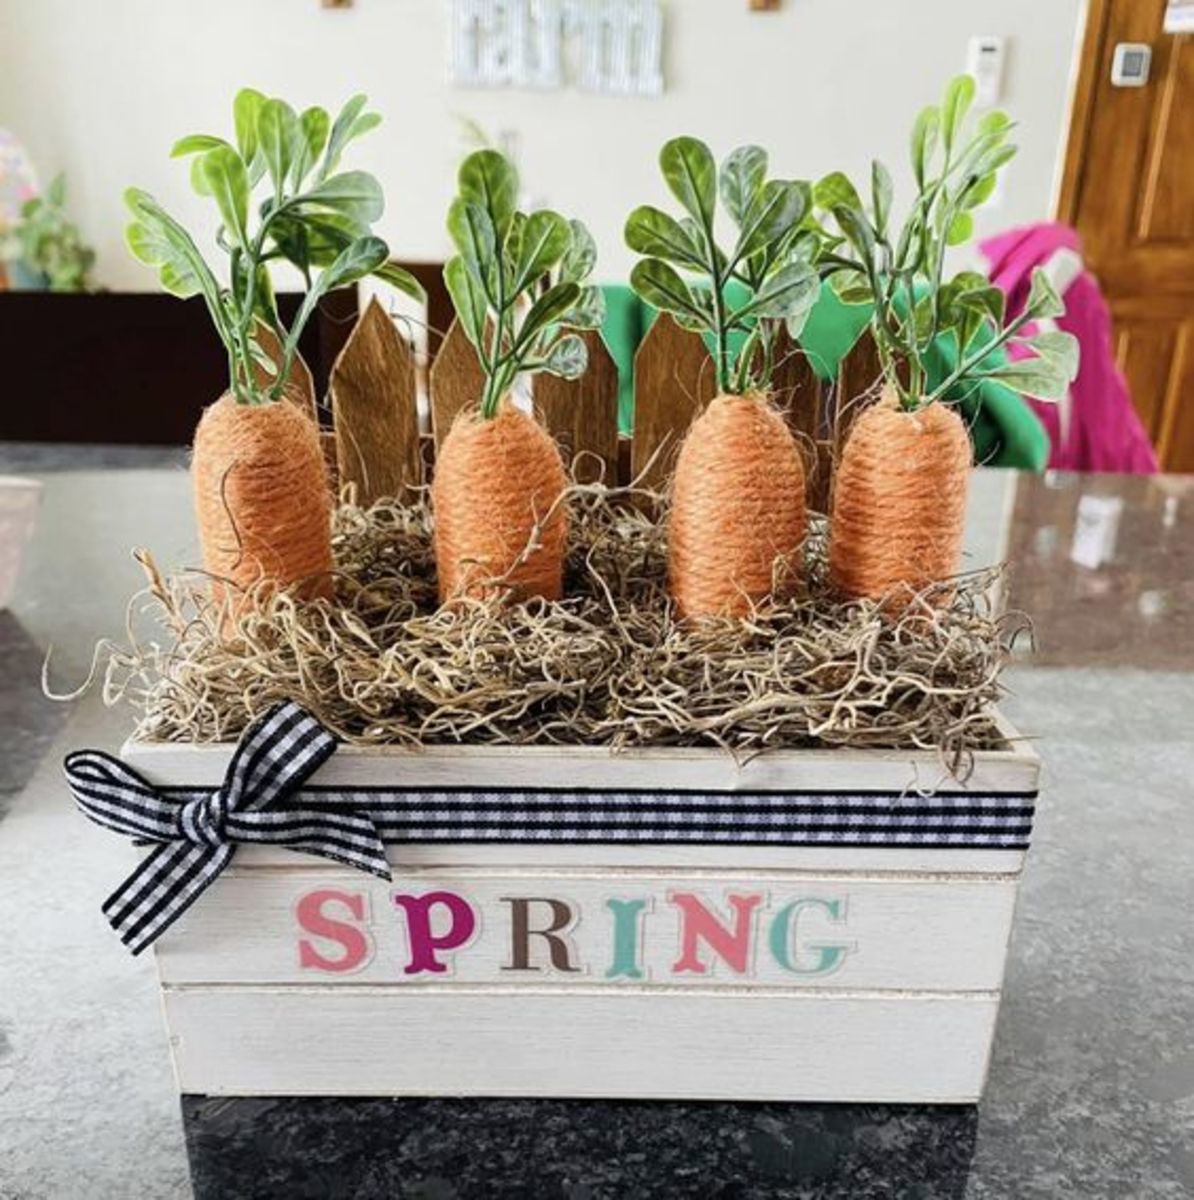 You can also make a planter box using jute carrots. "Plant" them in some faux moss for a realistic appearance.